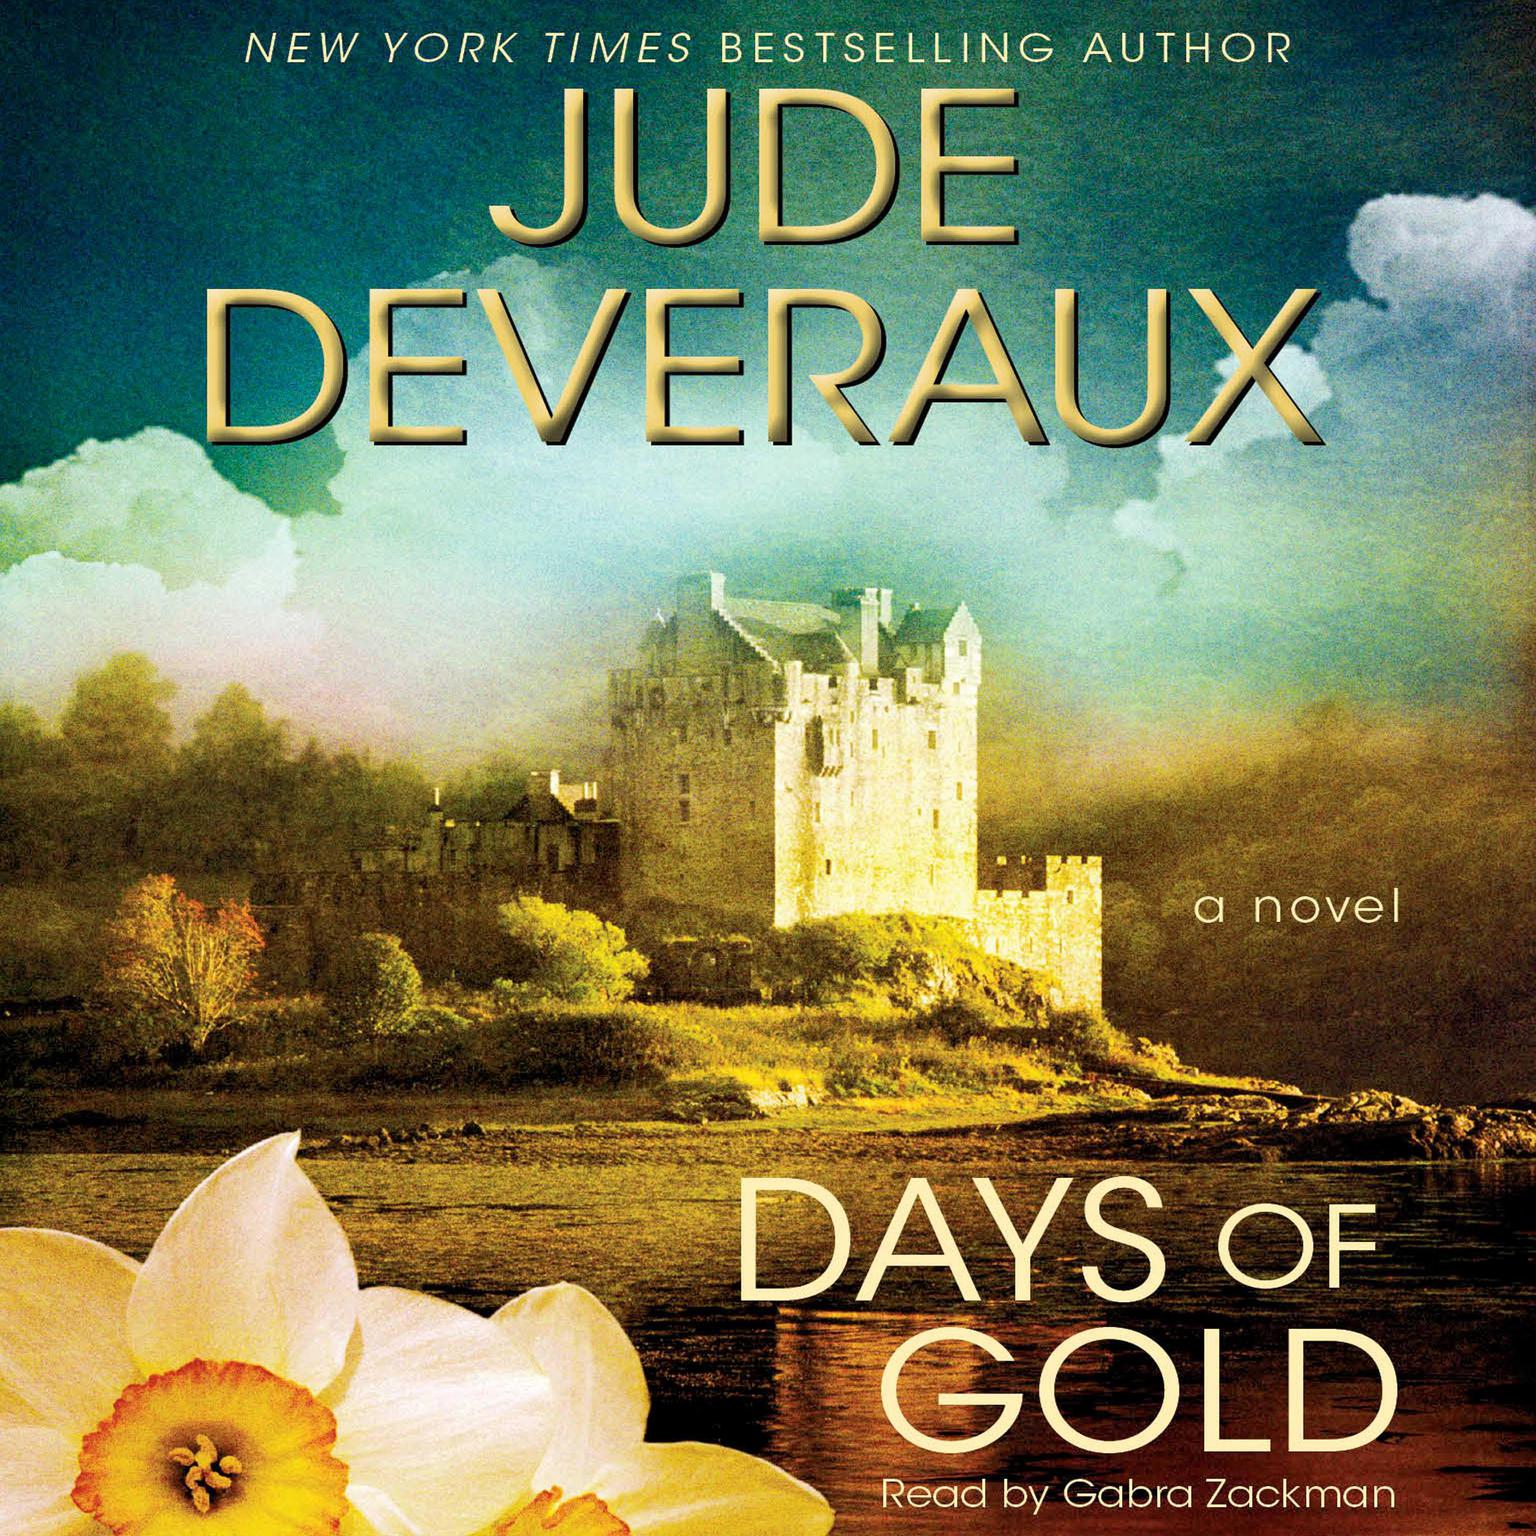 Days of Gold (Abridged): A Novel Audiobook, by Jude Deveraux